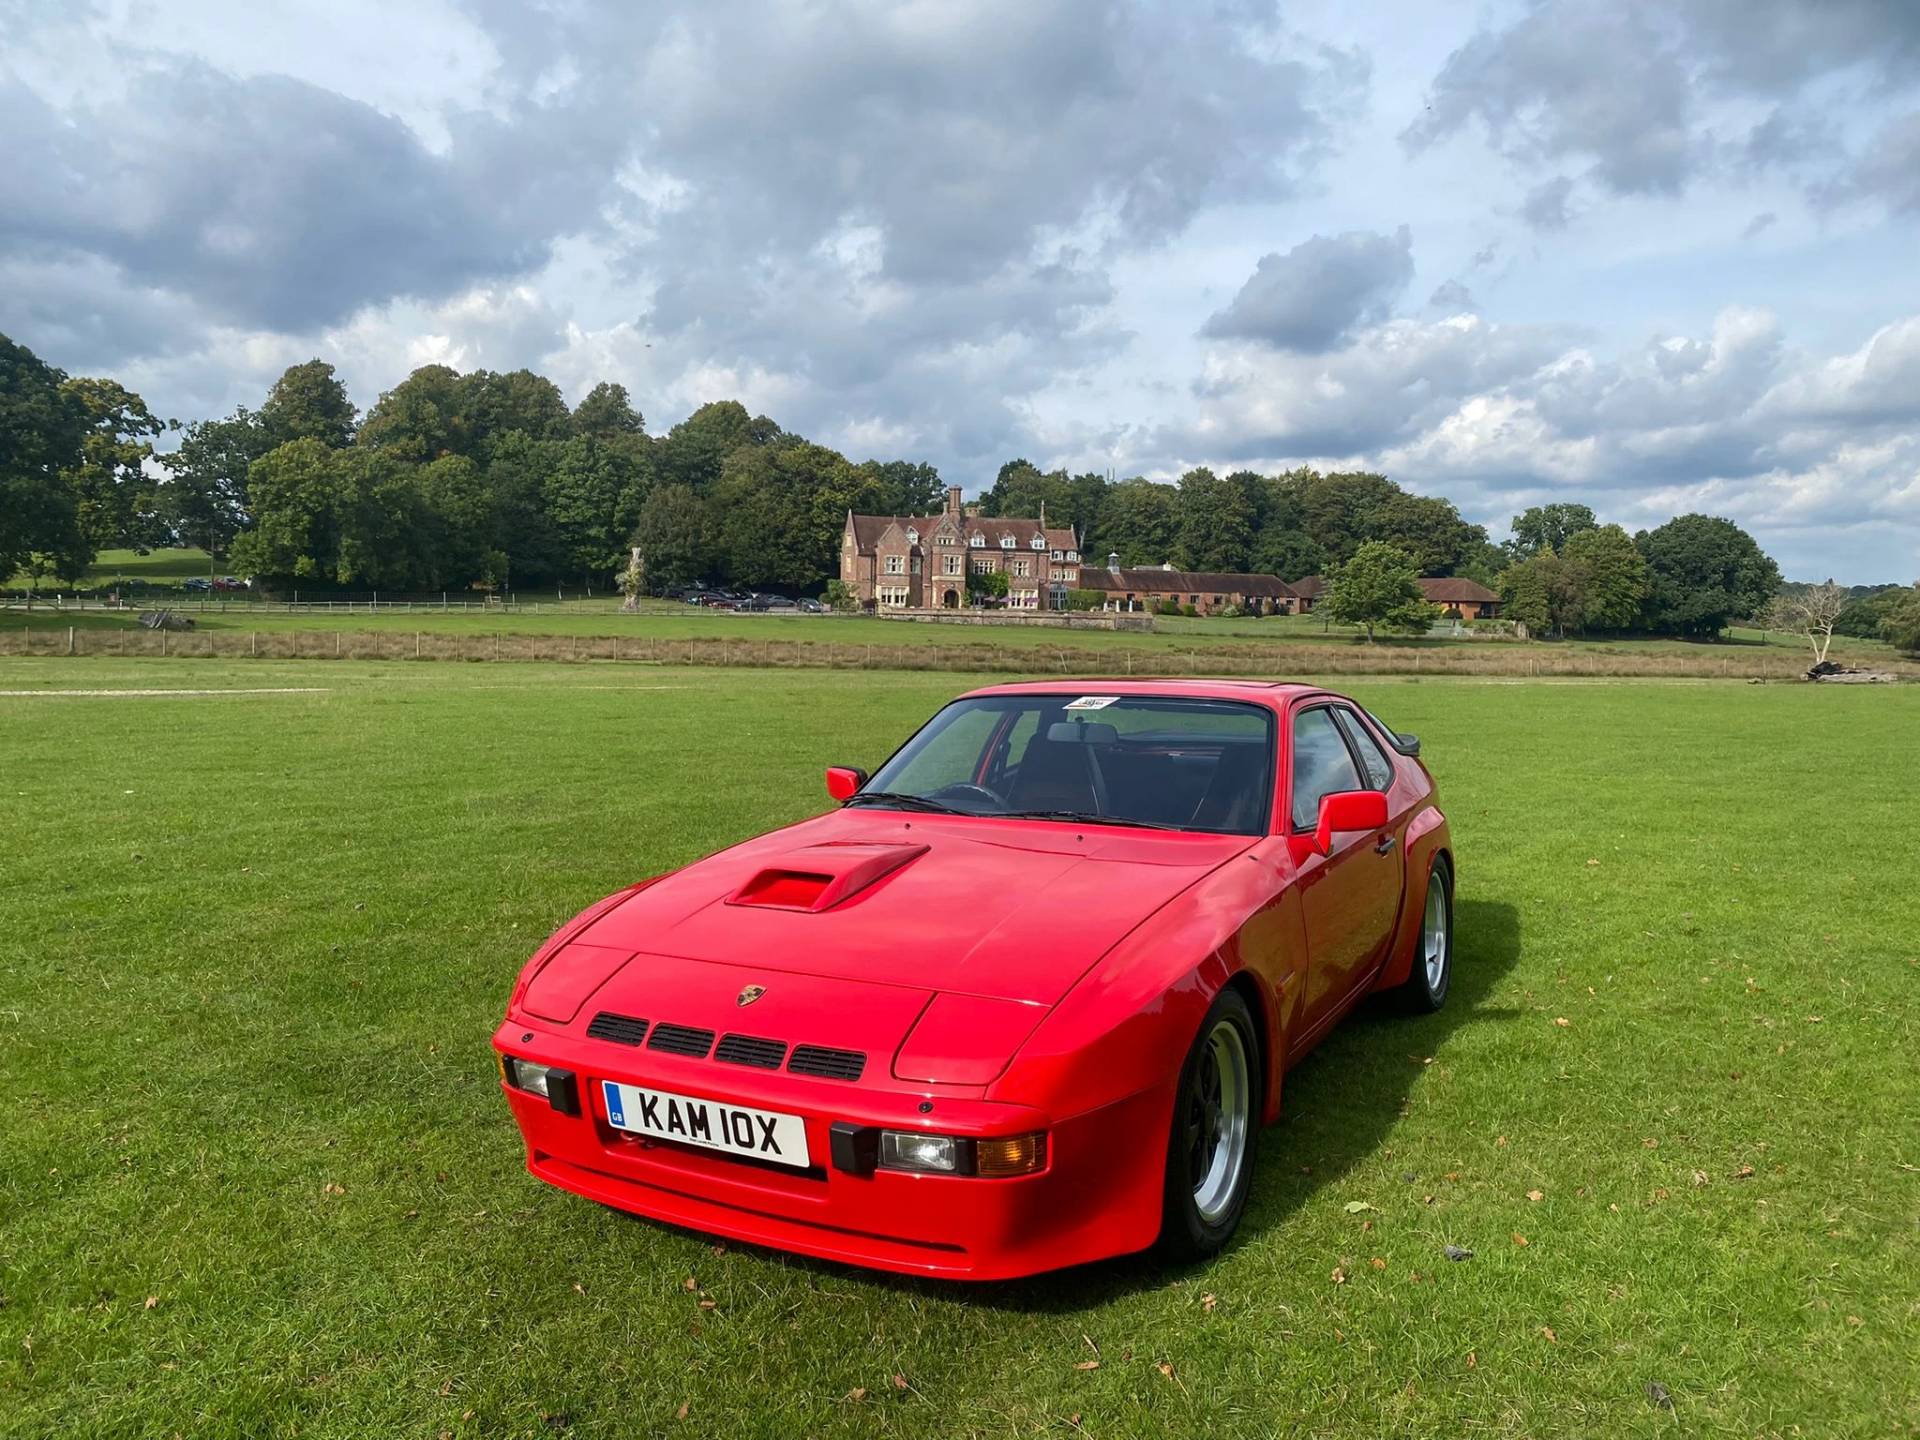 For Sale: Porsche 924 Carrera GT (1981) offered for GBP 74,995